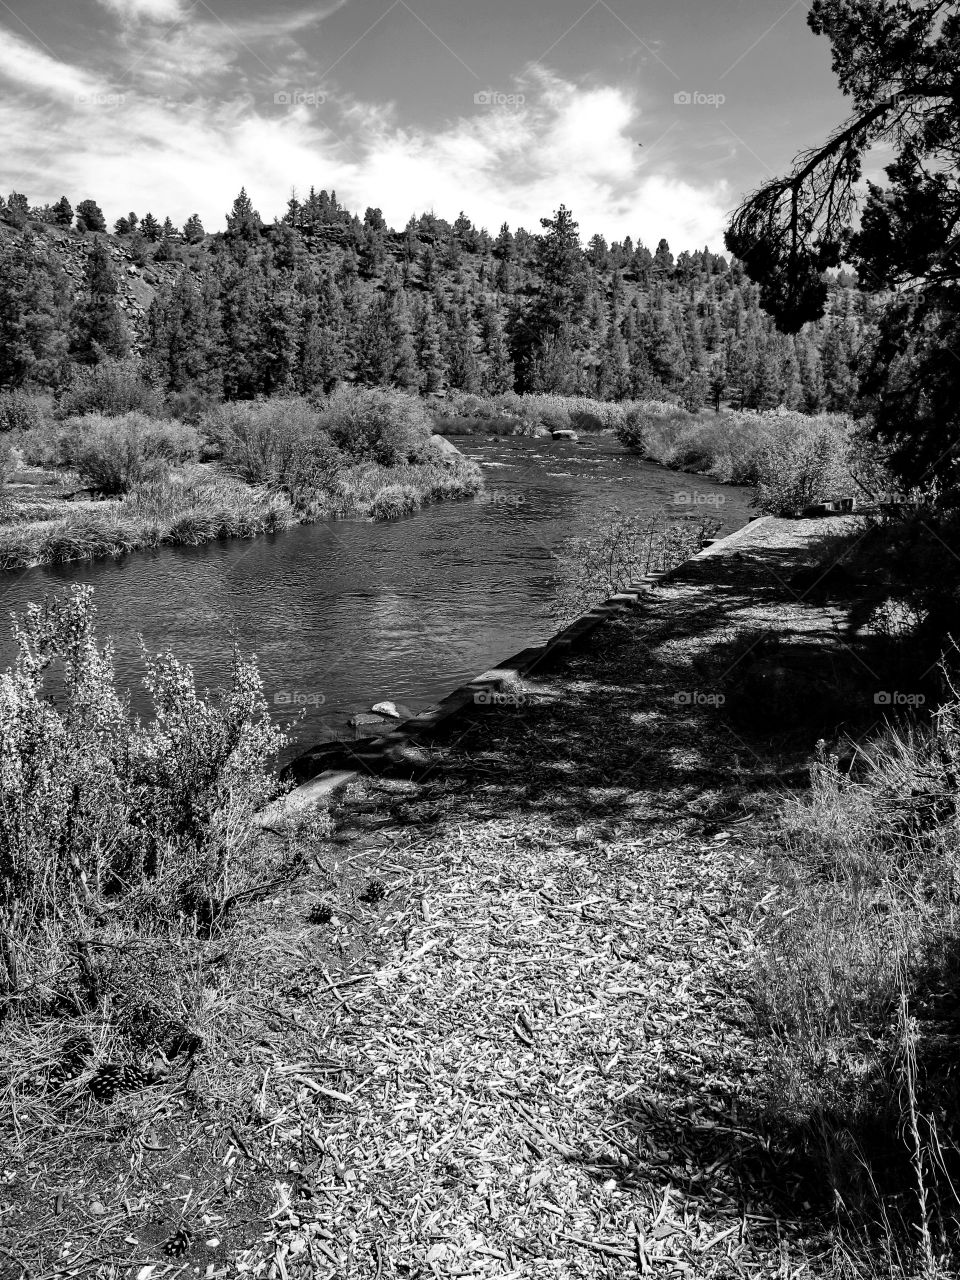 The beautiful Deschutes River winds through the woods alongside a nature trail near the Central Oregon town of Tumalo on a nice summer day. 